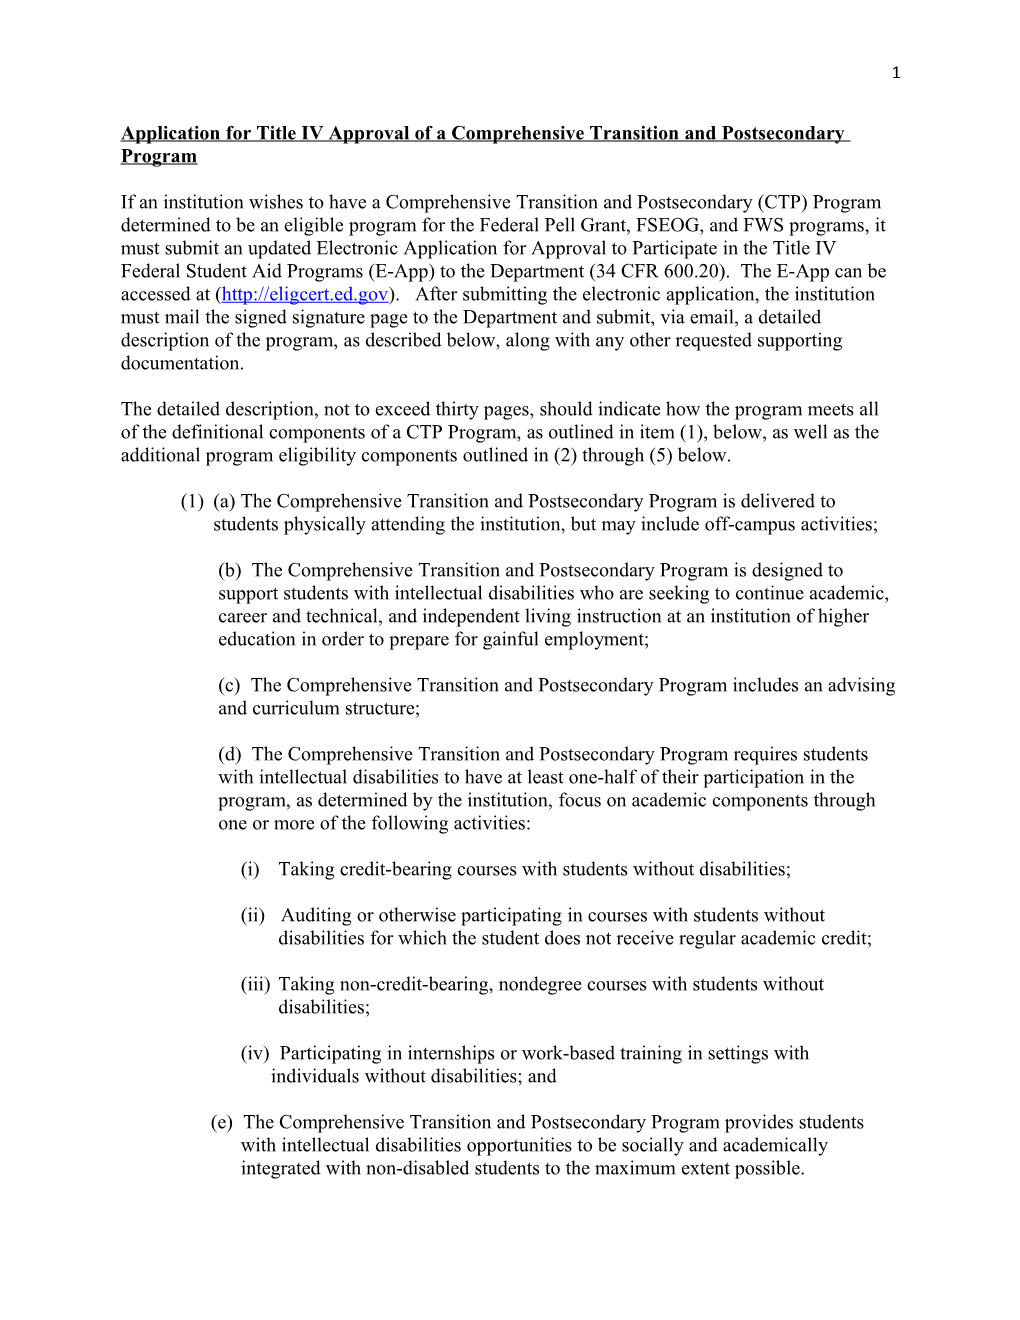 Application for Title IV Approval of a Comprehensive Transition and Postsecondary Program